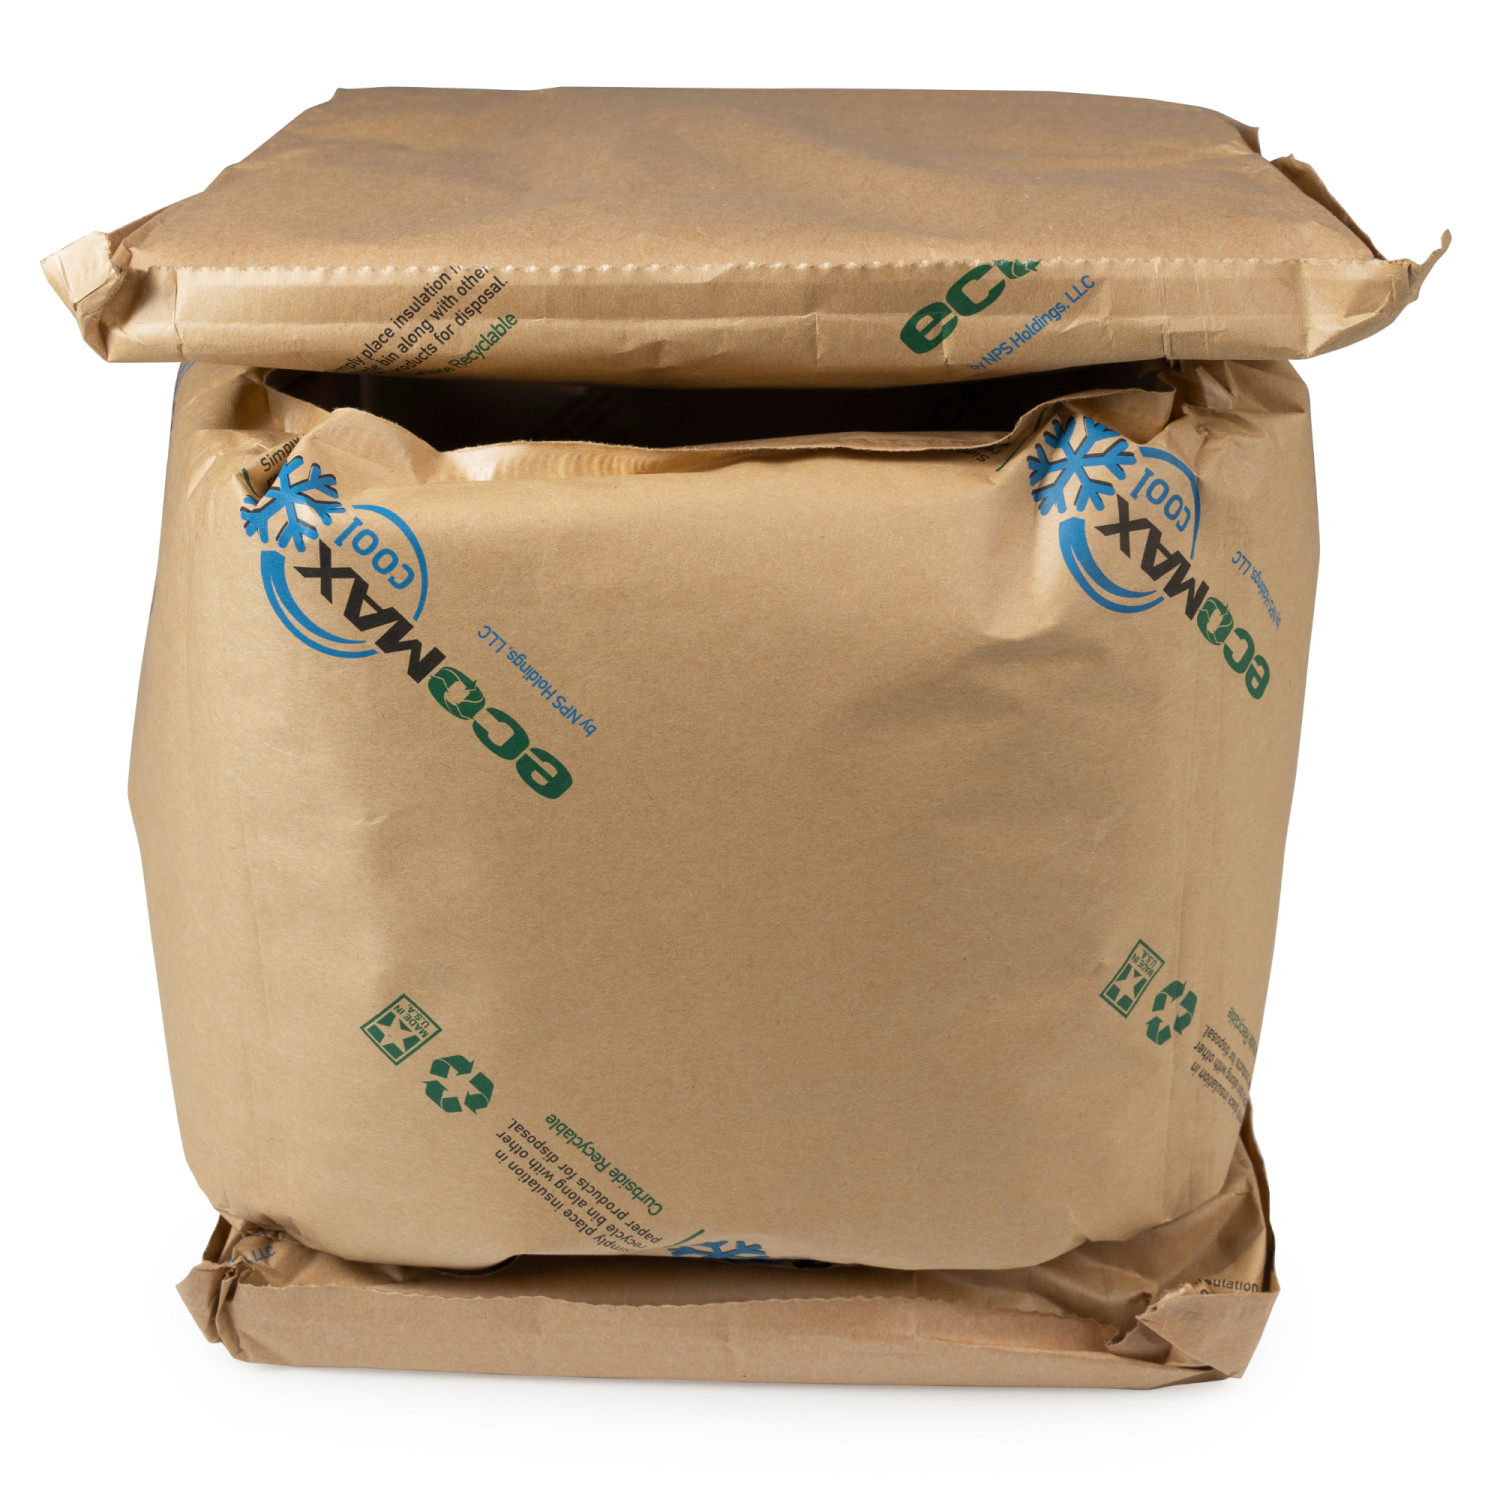 Thermal Wrap Insulation with Shipping Box – For 3.5 – 5 Gallon Pails